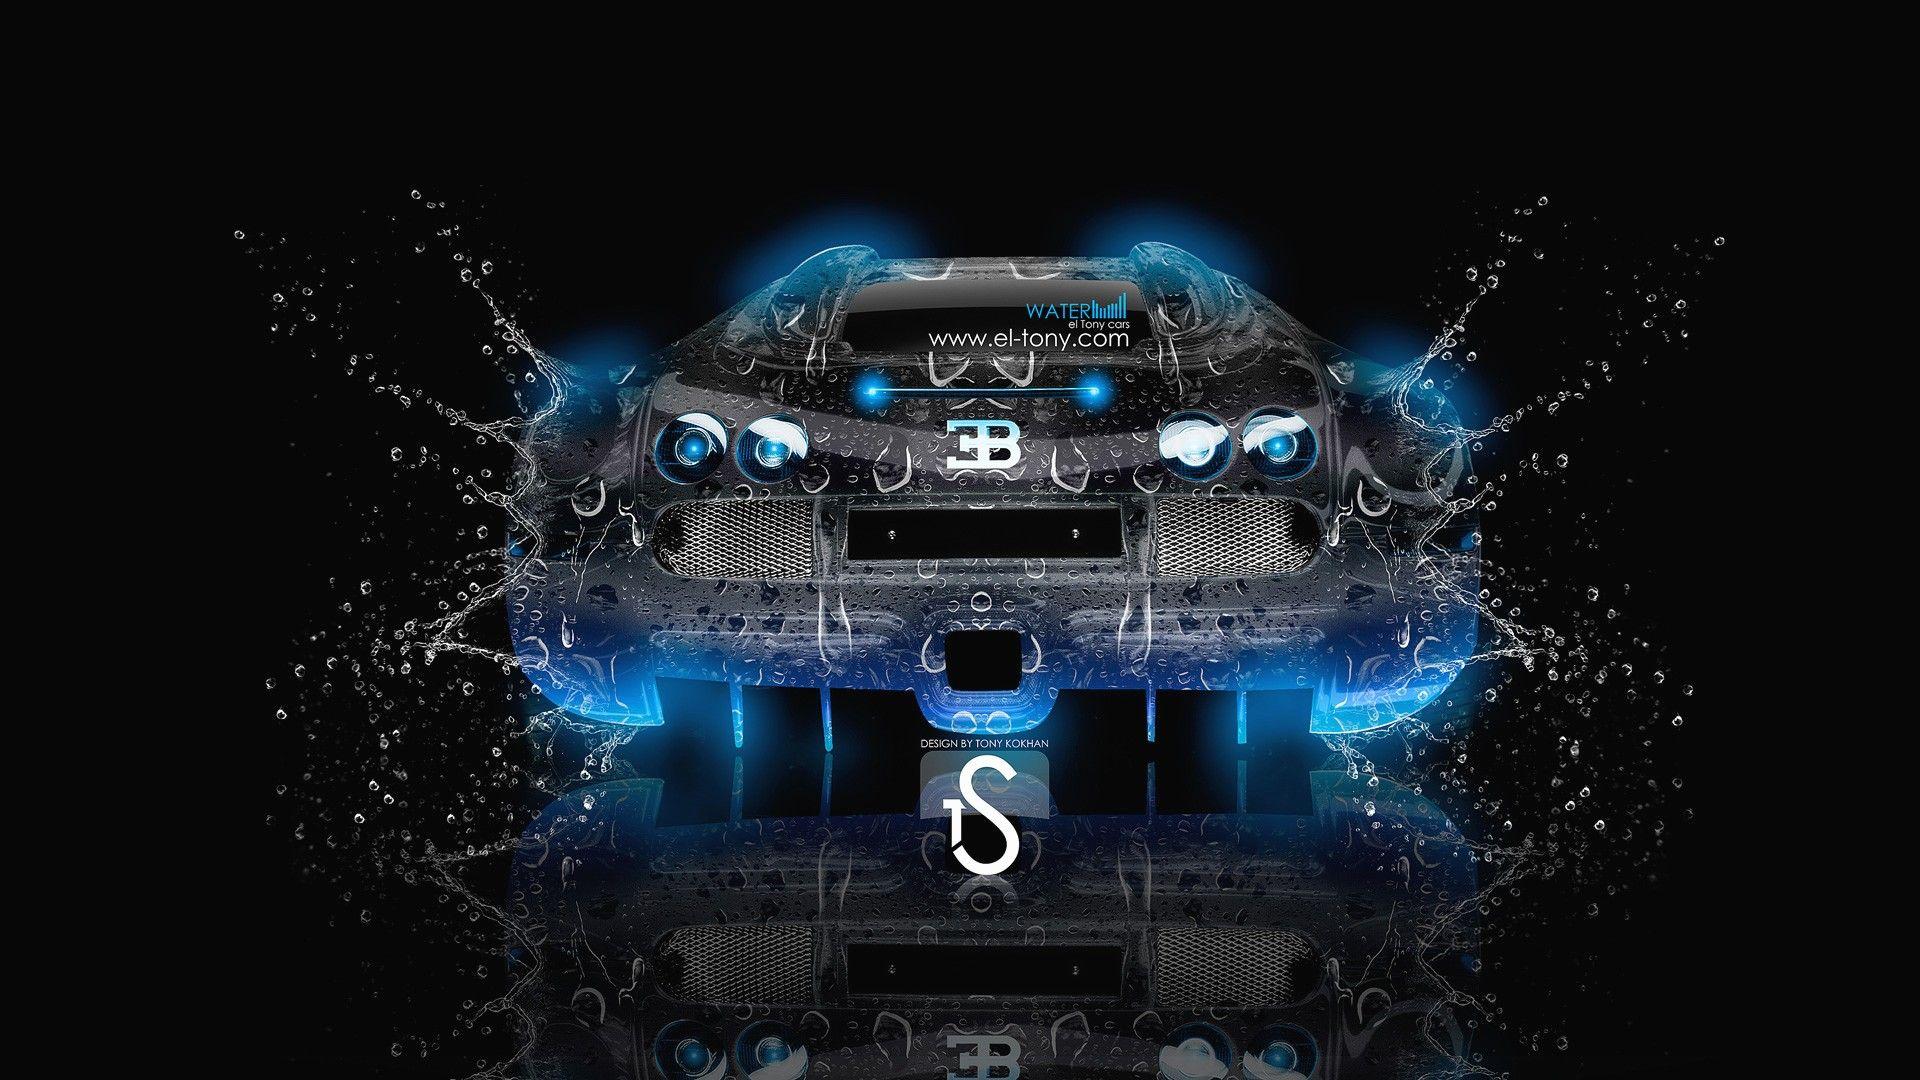 Cool Neon Cars Wallpapers - Top Free Cool Neon Cars Backgrounds